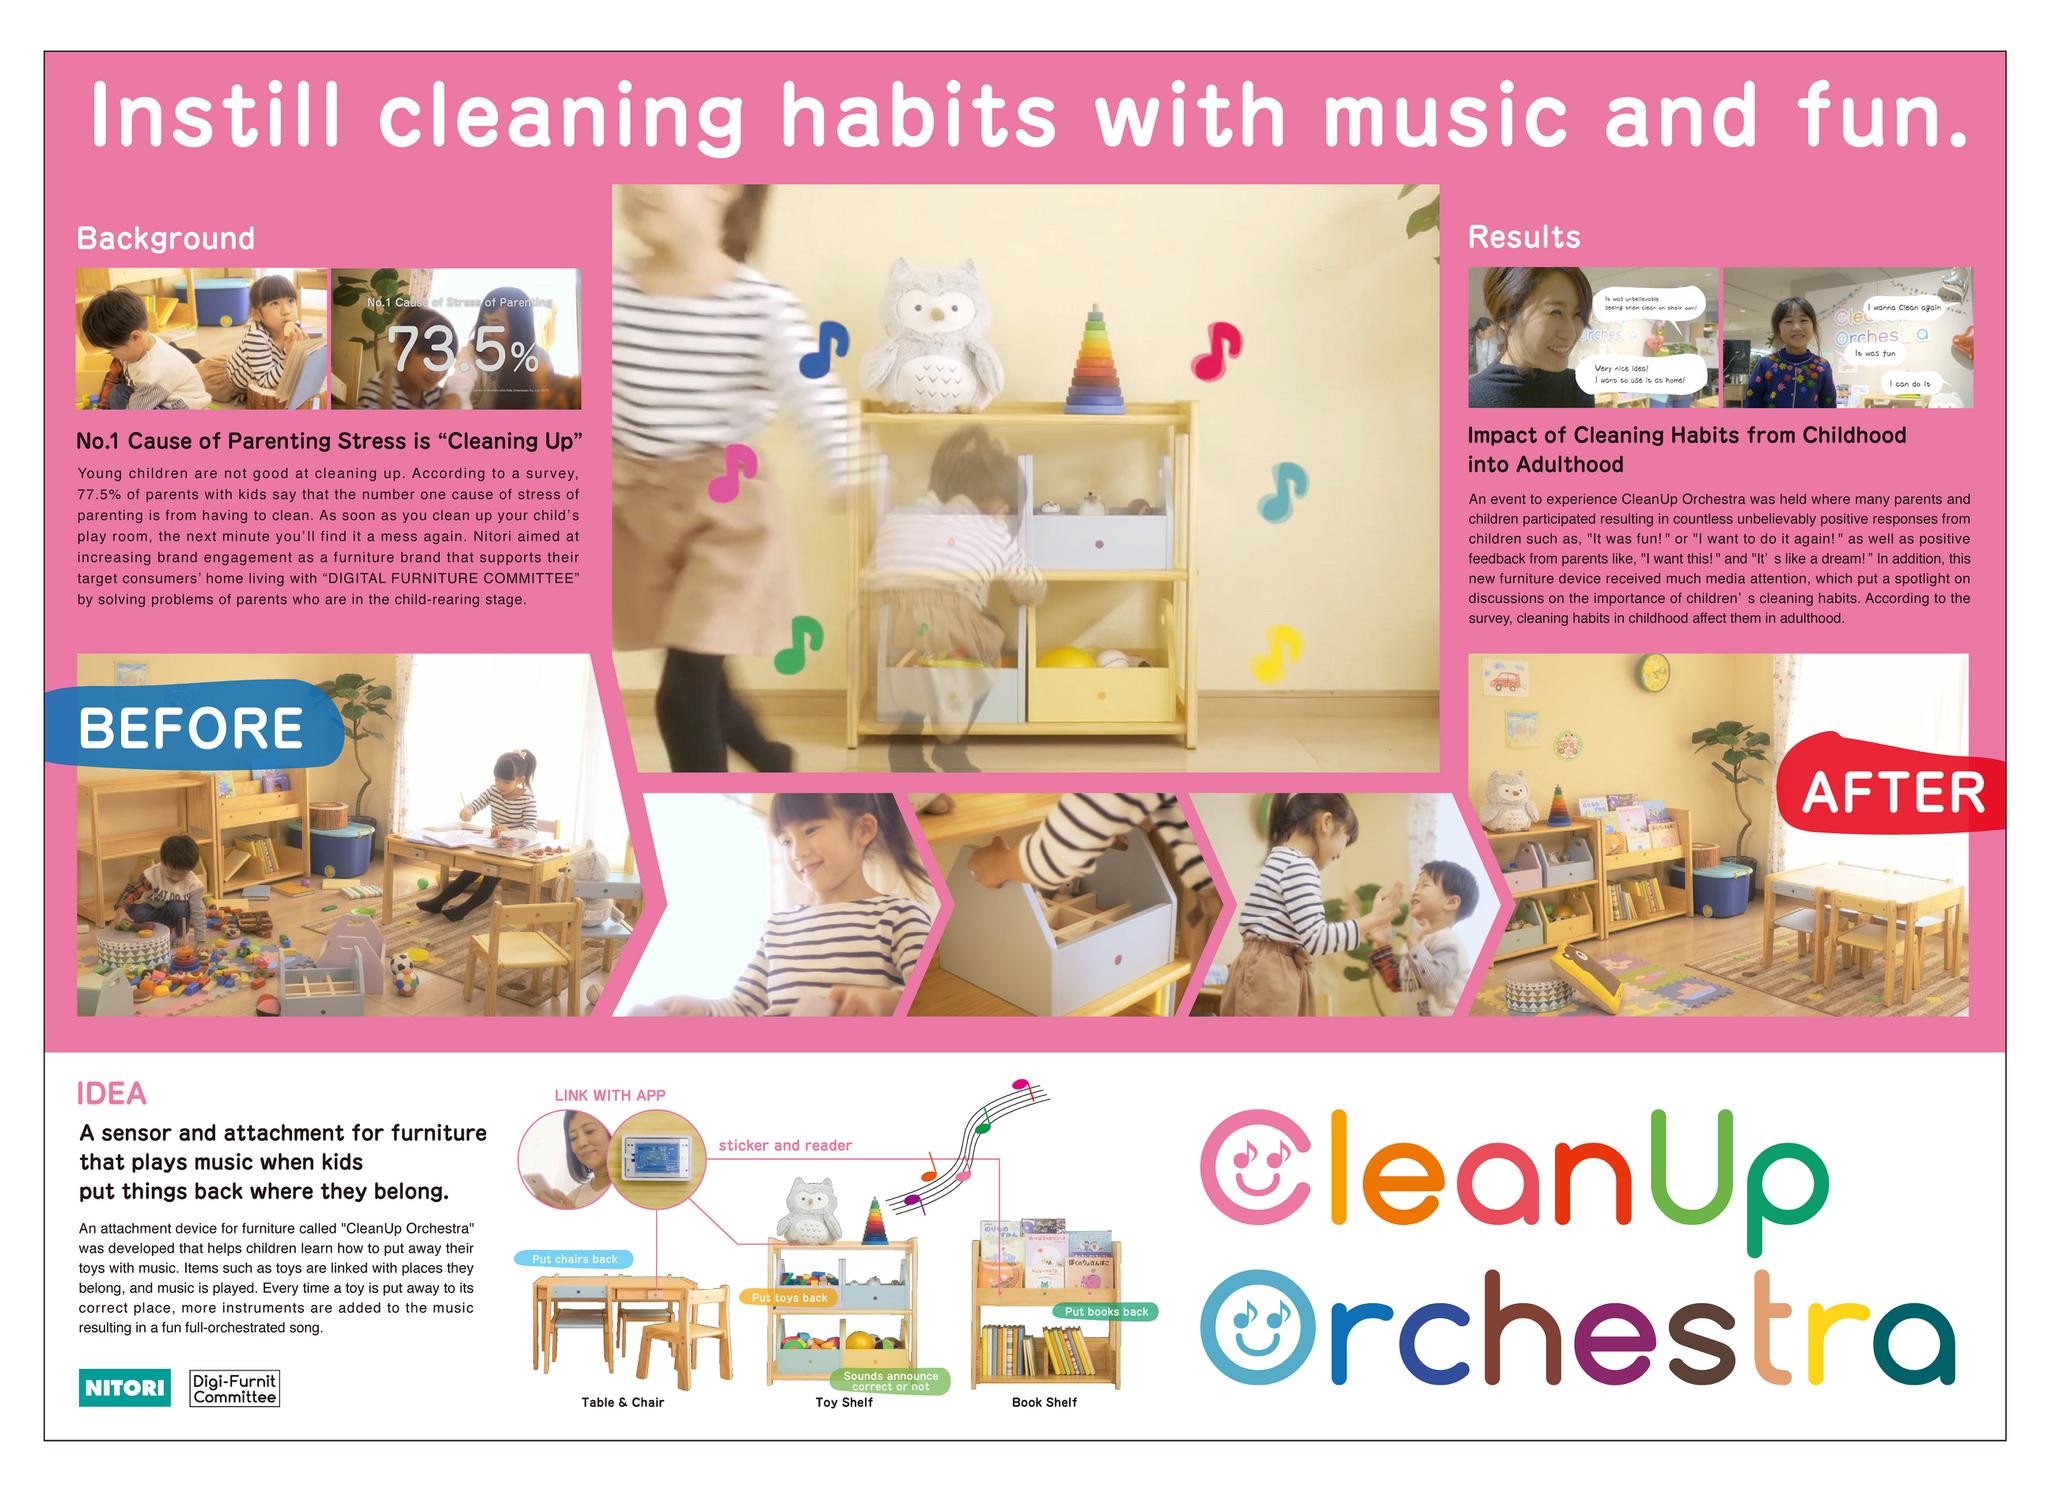 CleanUp Orchestra